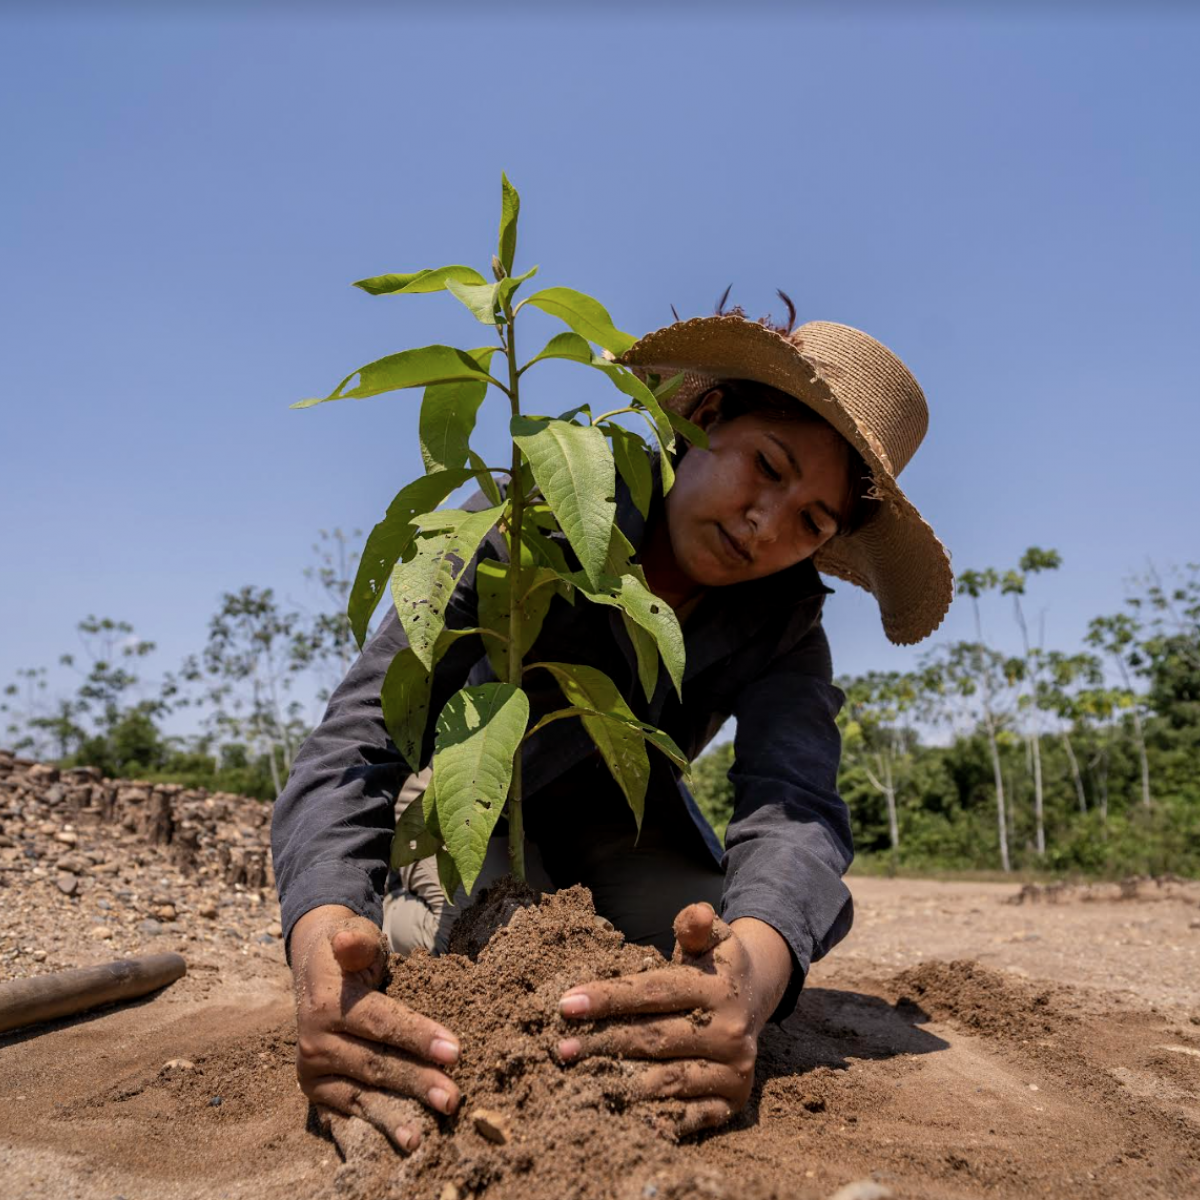 Woman plants species in an area that has been deforested by illegal mining